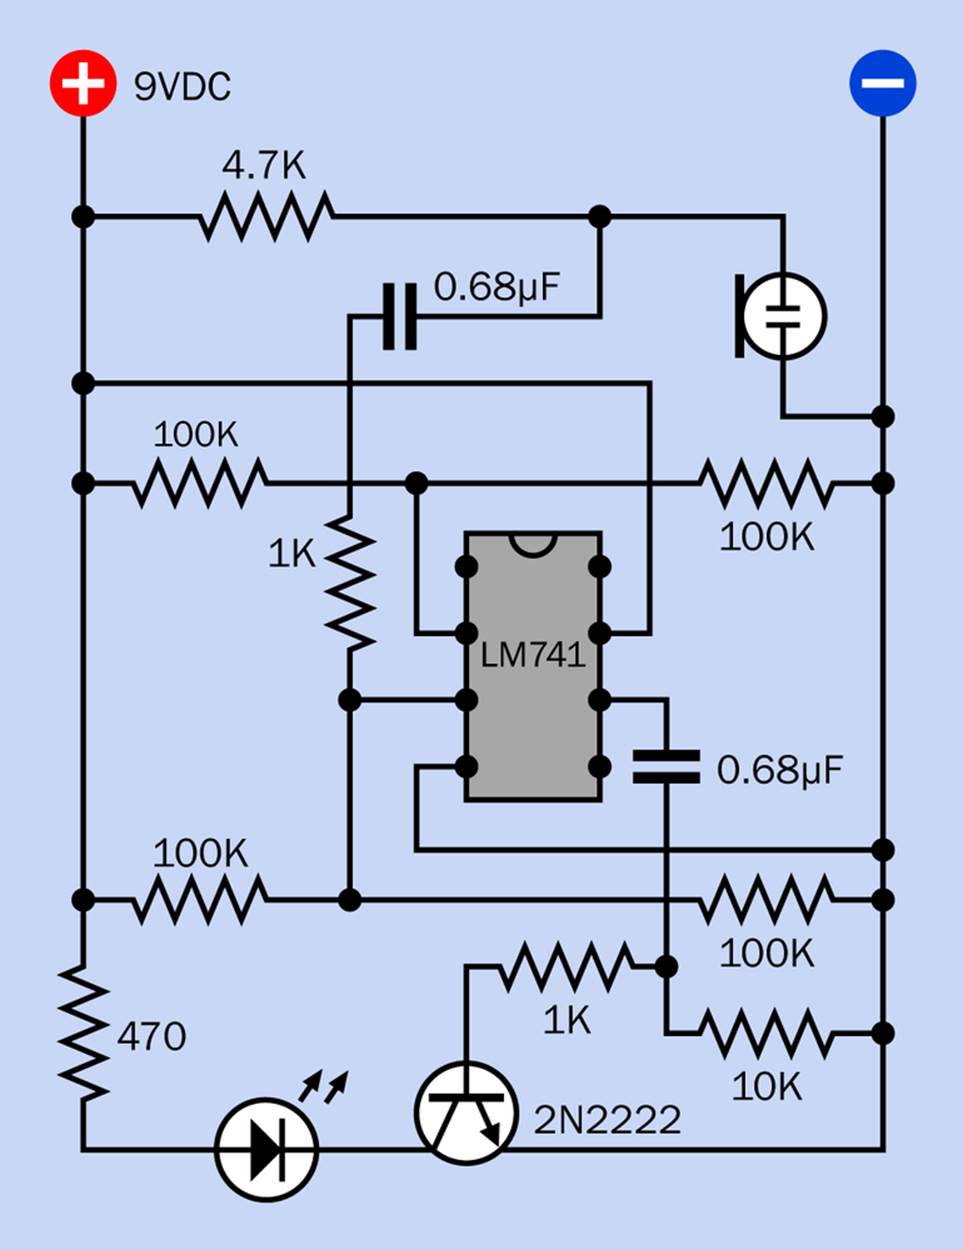 This op-amp test circuit will flash the LED whenever the electret microphone picks up sound of moderate intensity.